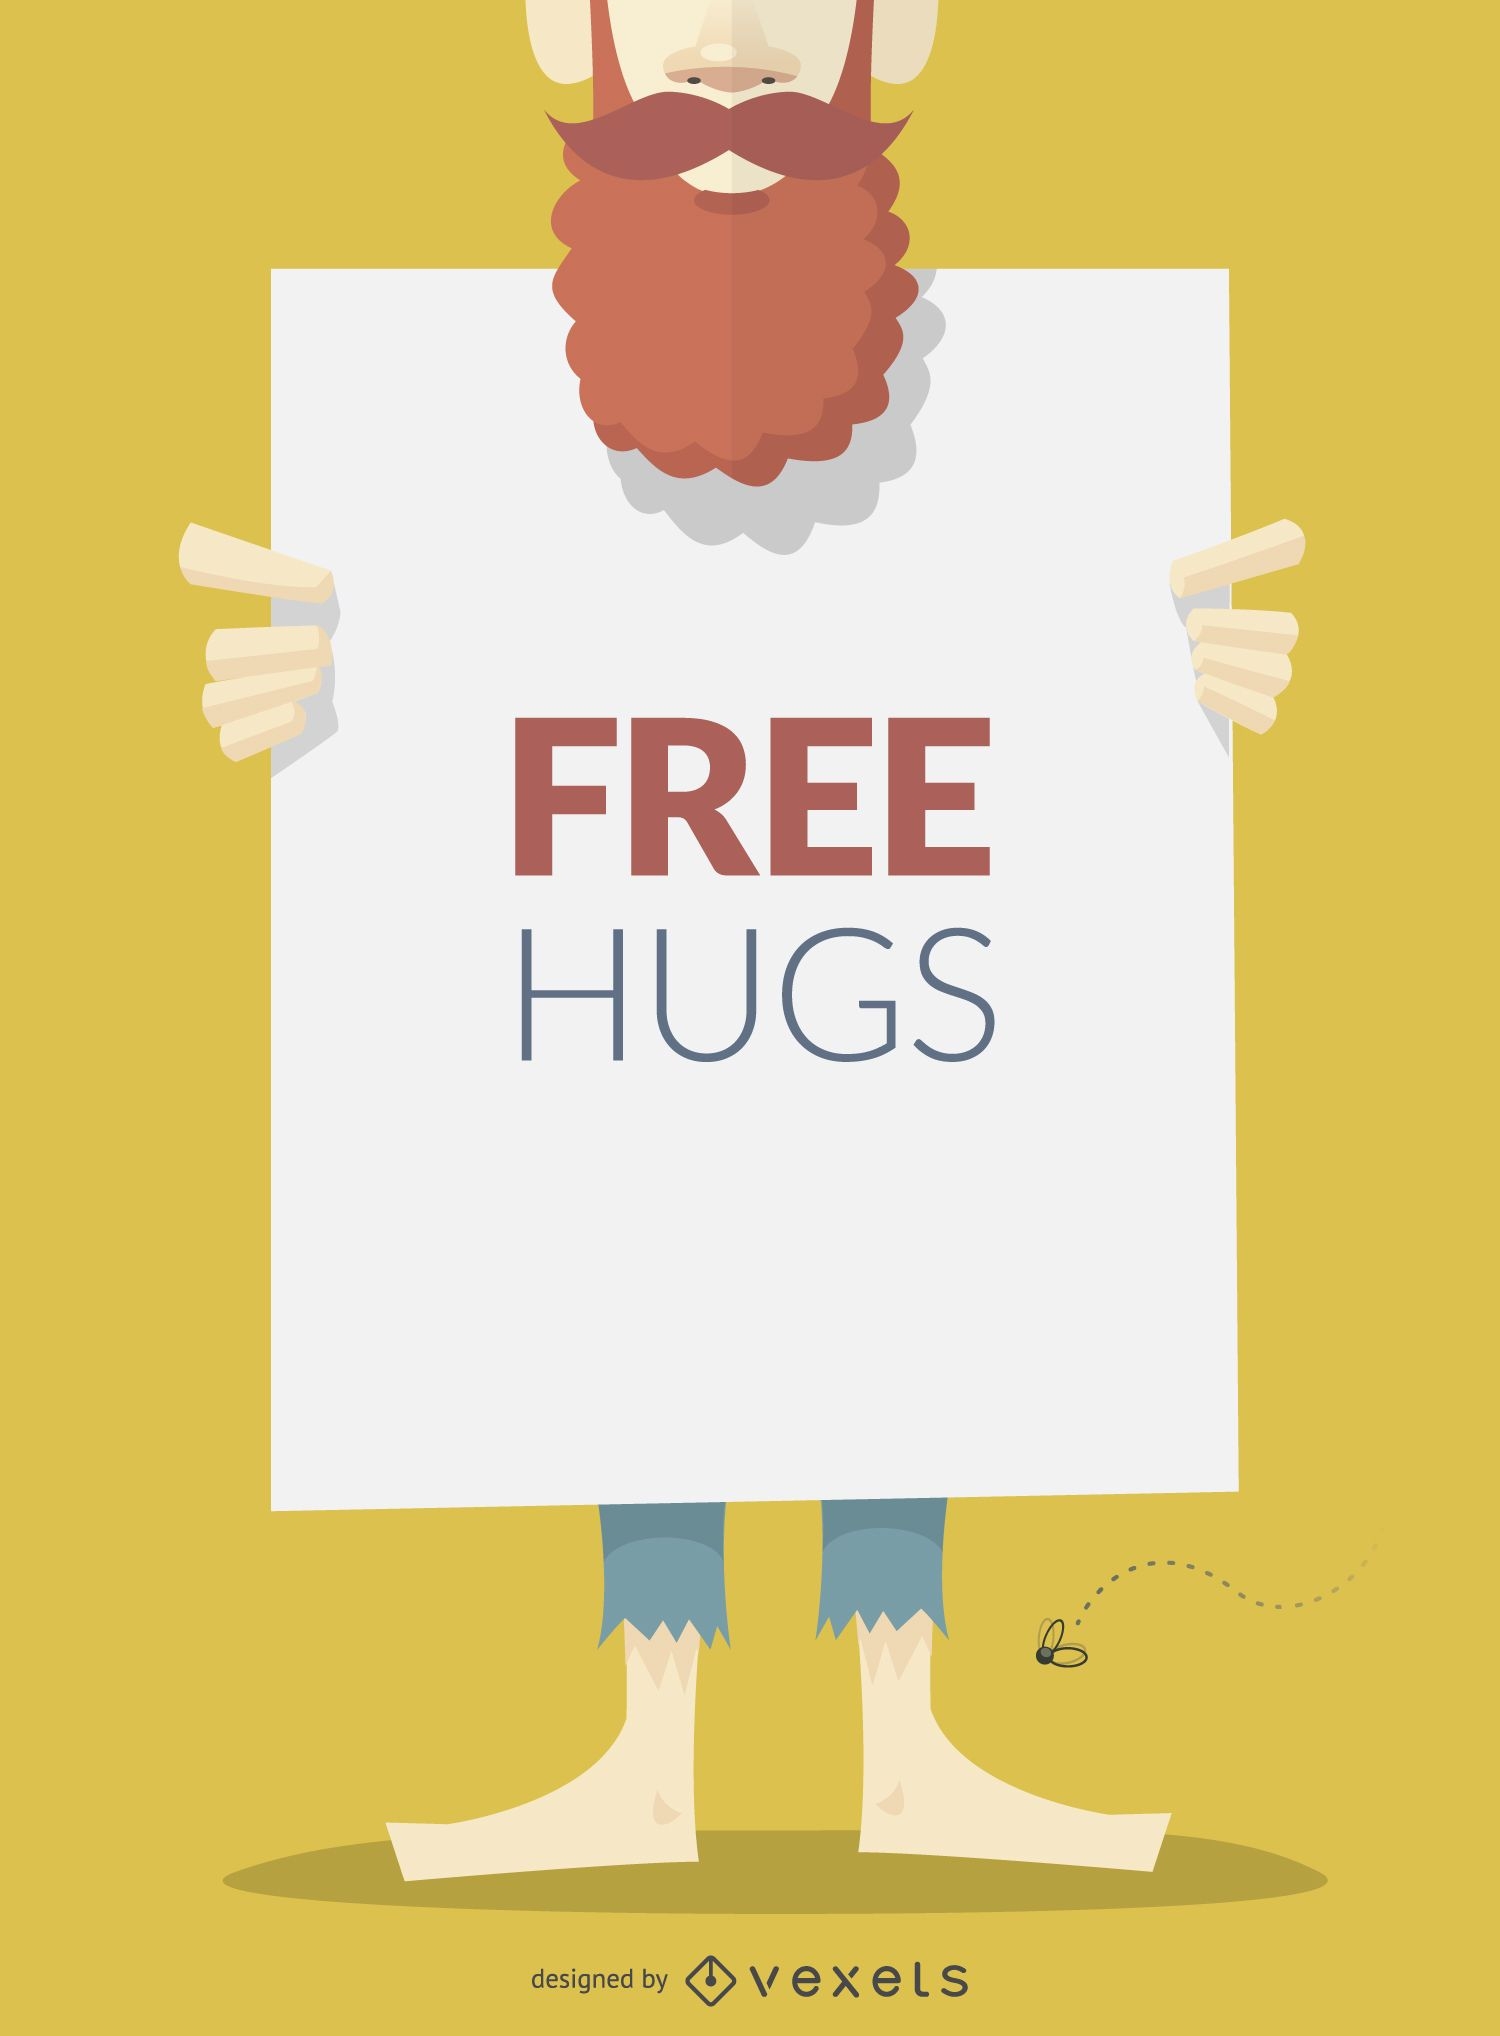 Free hugs sign or poster